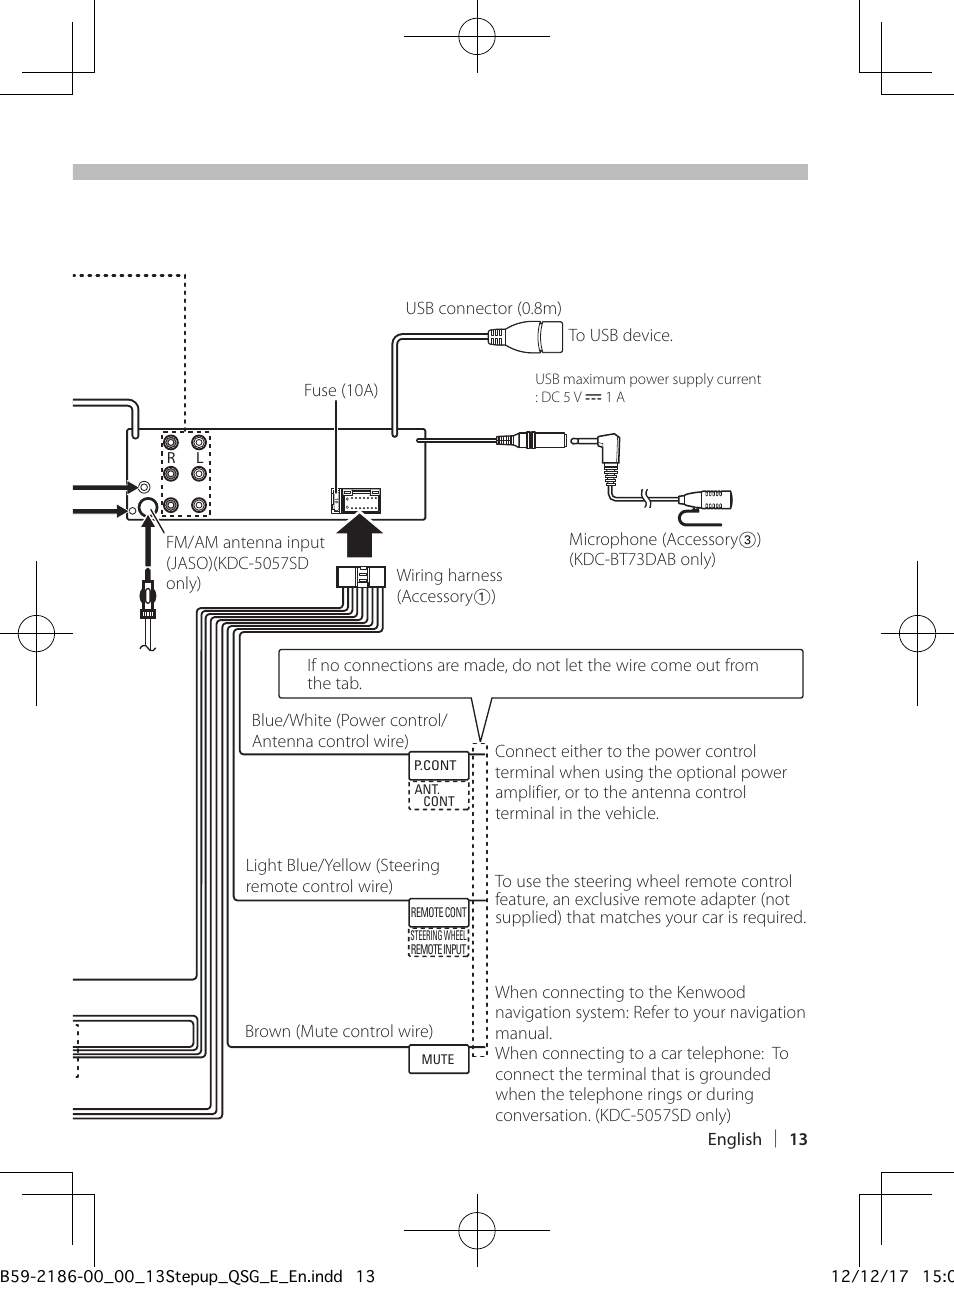 Connecting wires to terminals | Kenwood KDC-BT53U User Manual | Page 13 / 20